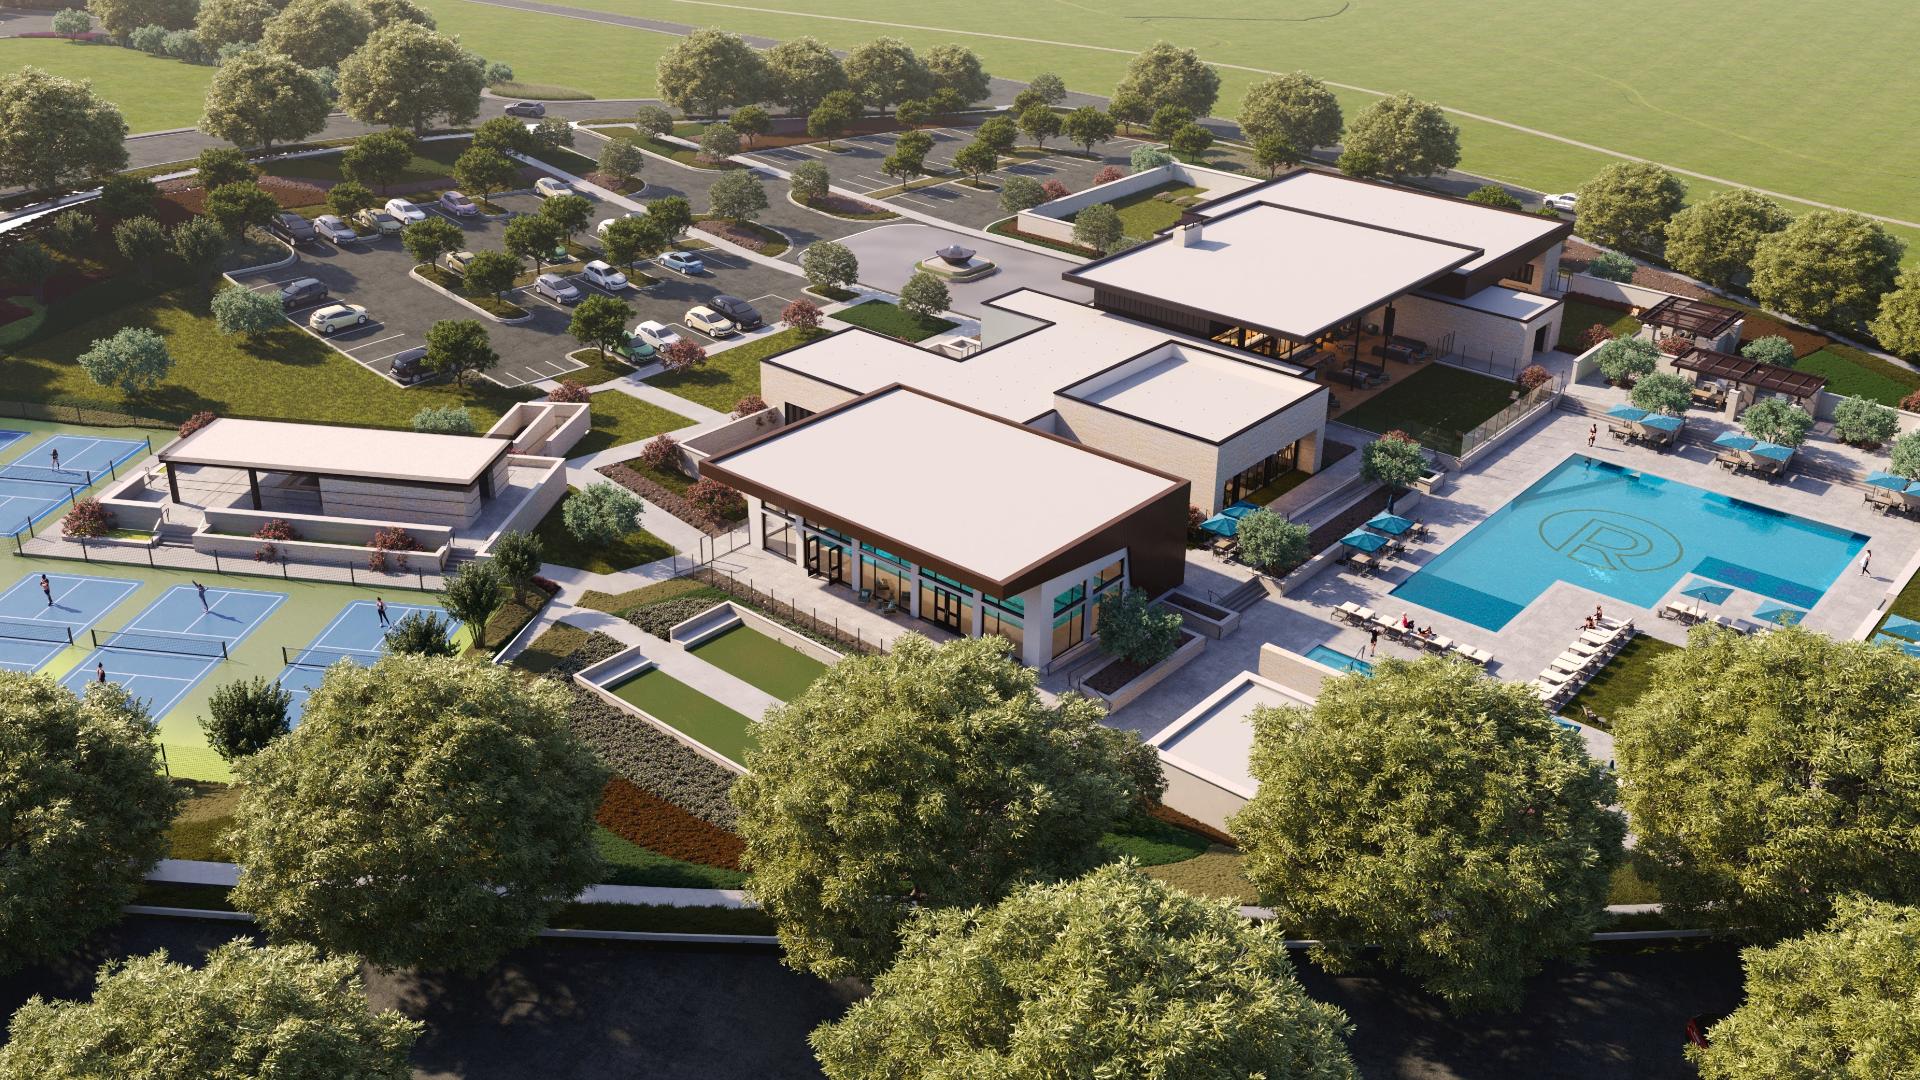 The 18,000 square-foot clubhouse offers a fitness center, indoor and outdoor pools, bocce ball, and pickleball